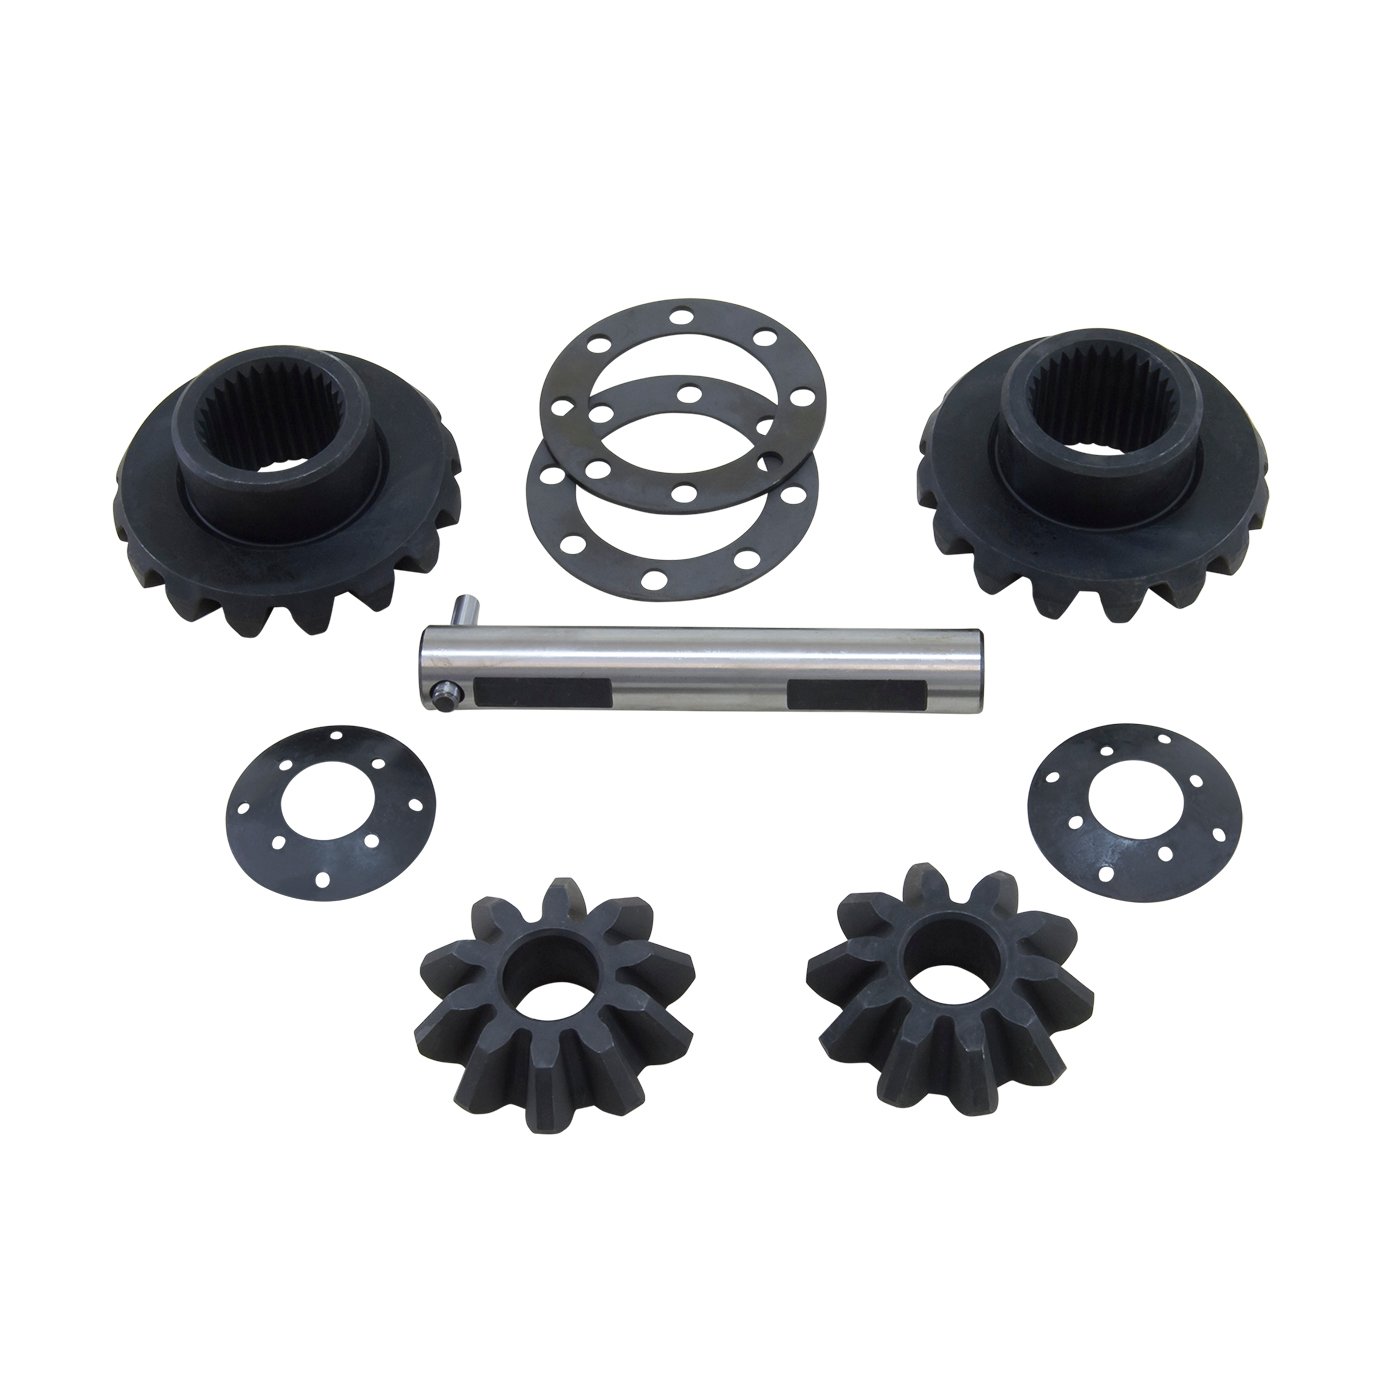 Standard Open Spider Gear Set For Toyota 8 in. Ifs Front, Clamshell Design.